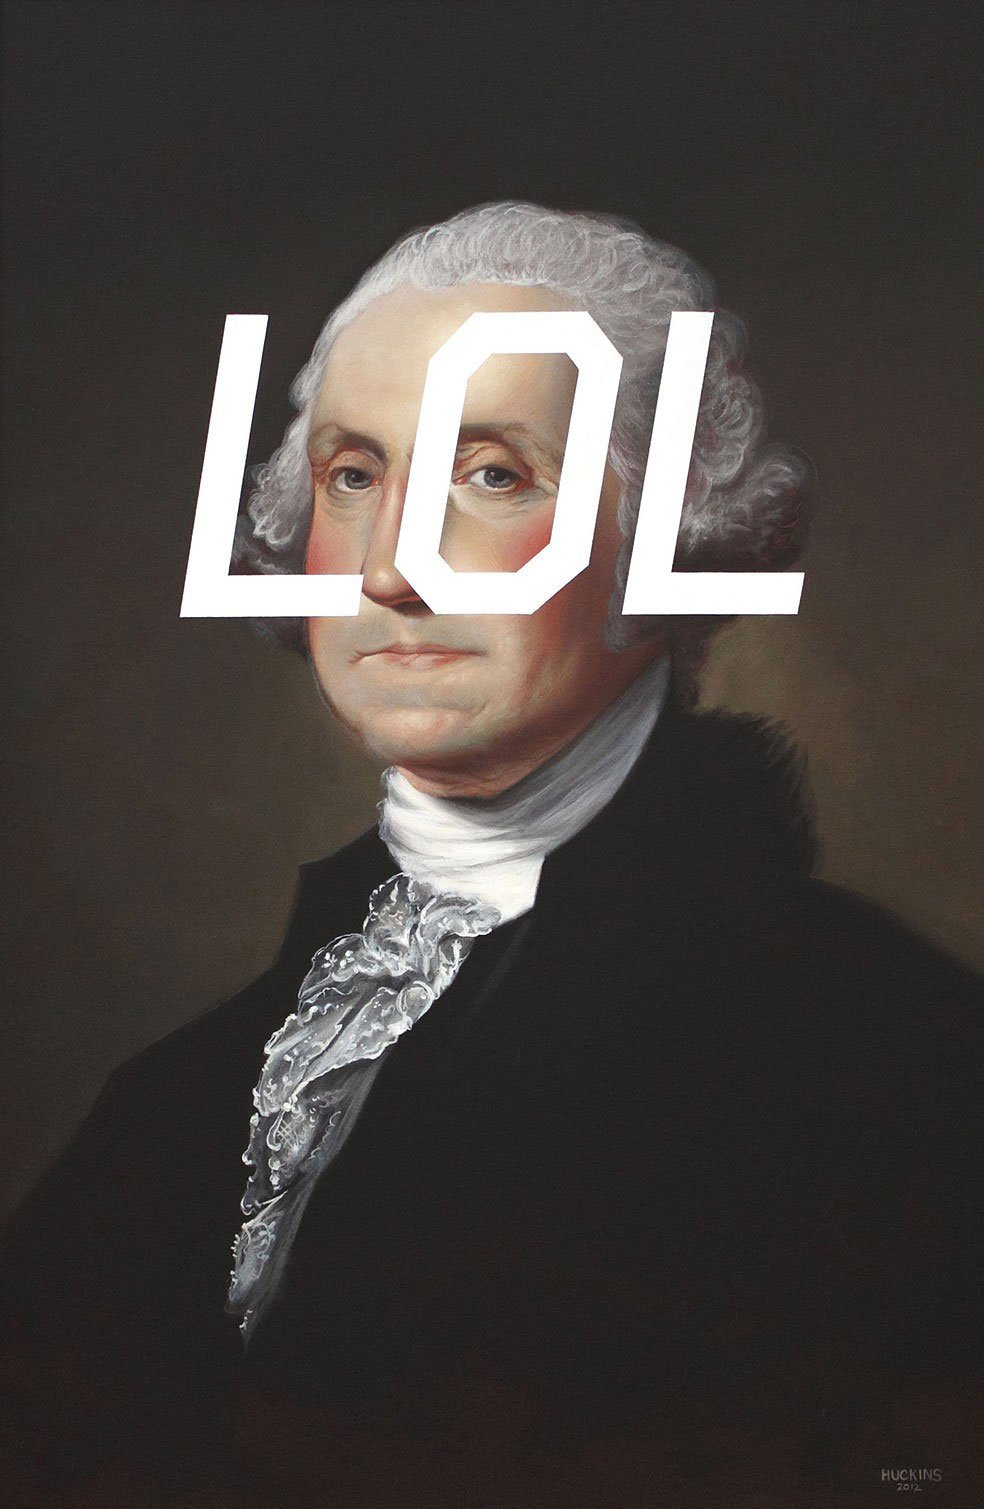 Shawn Huckins, Washington: Laughing Out Loud, acrylic + pencil on canvas, 36 x 24 in (91 x 61 cm), 2012. Private collection, Pasadena, CA.